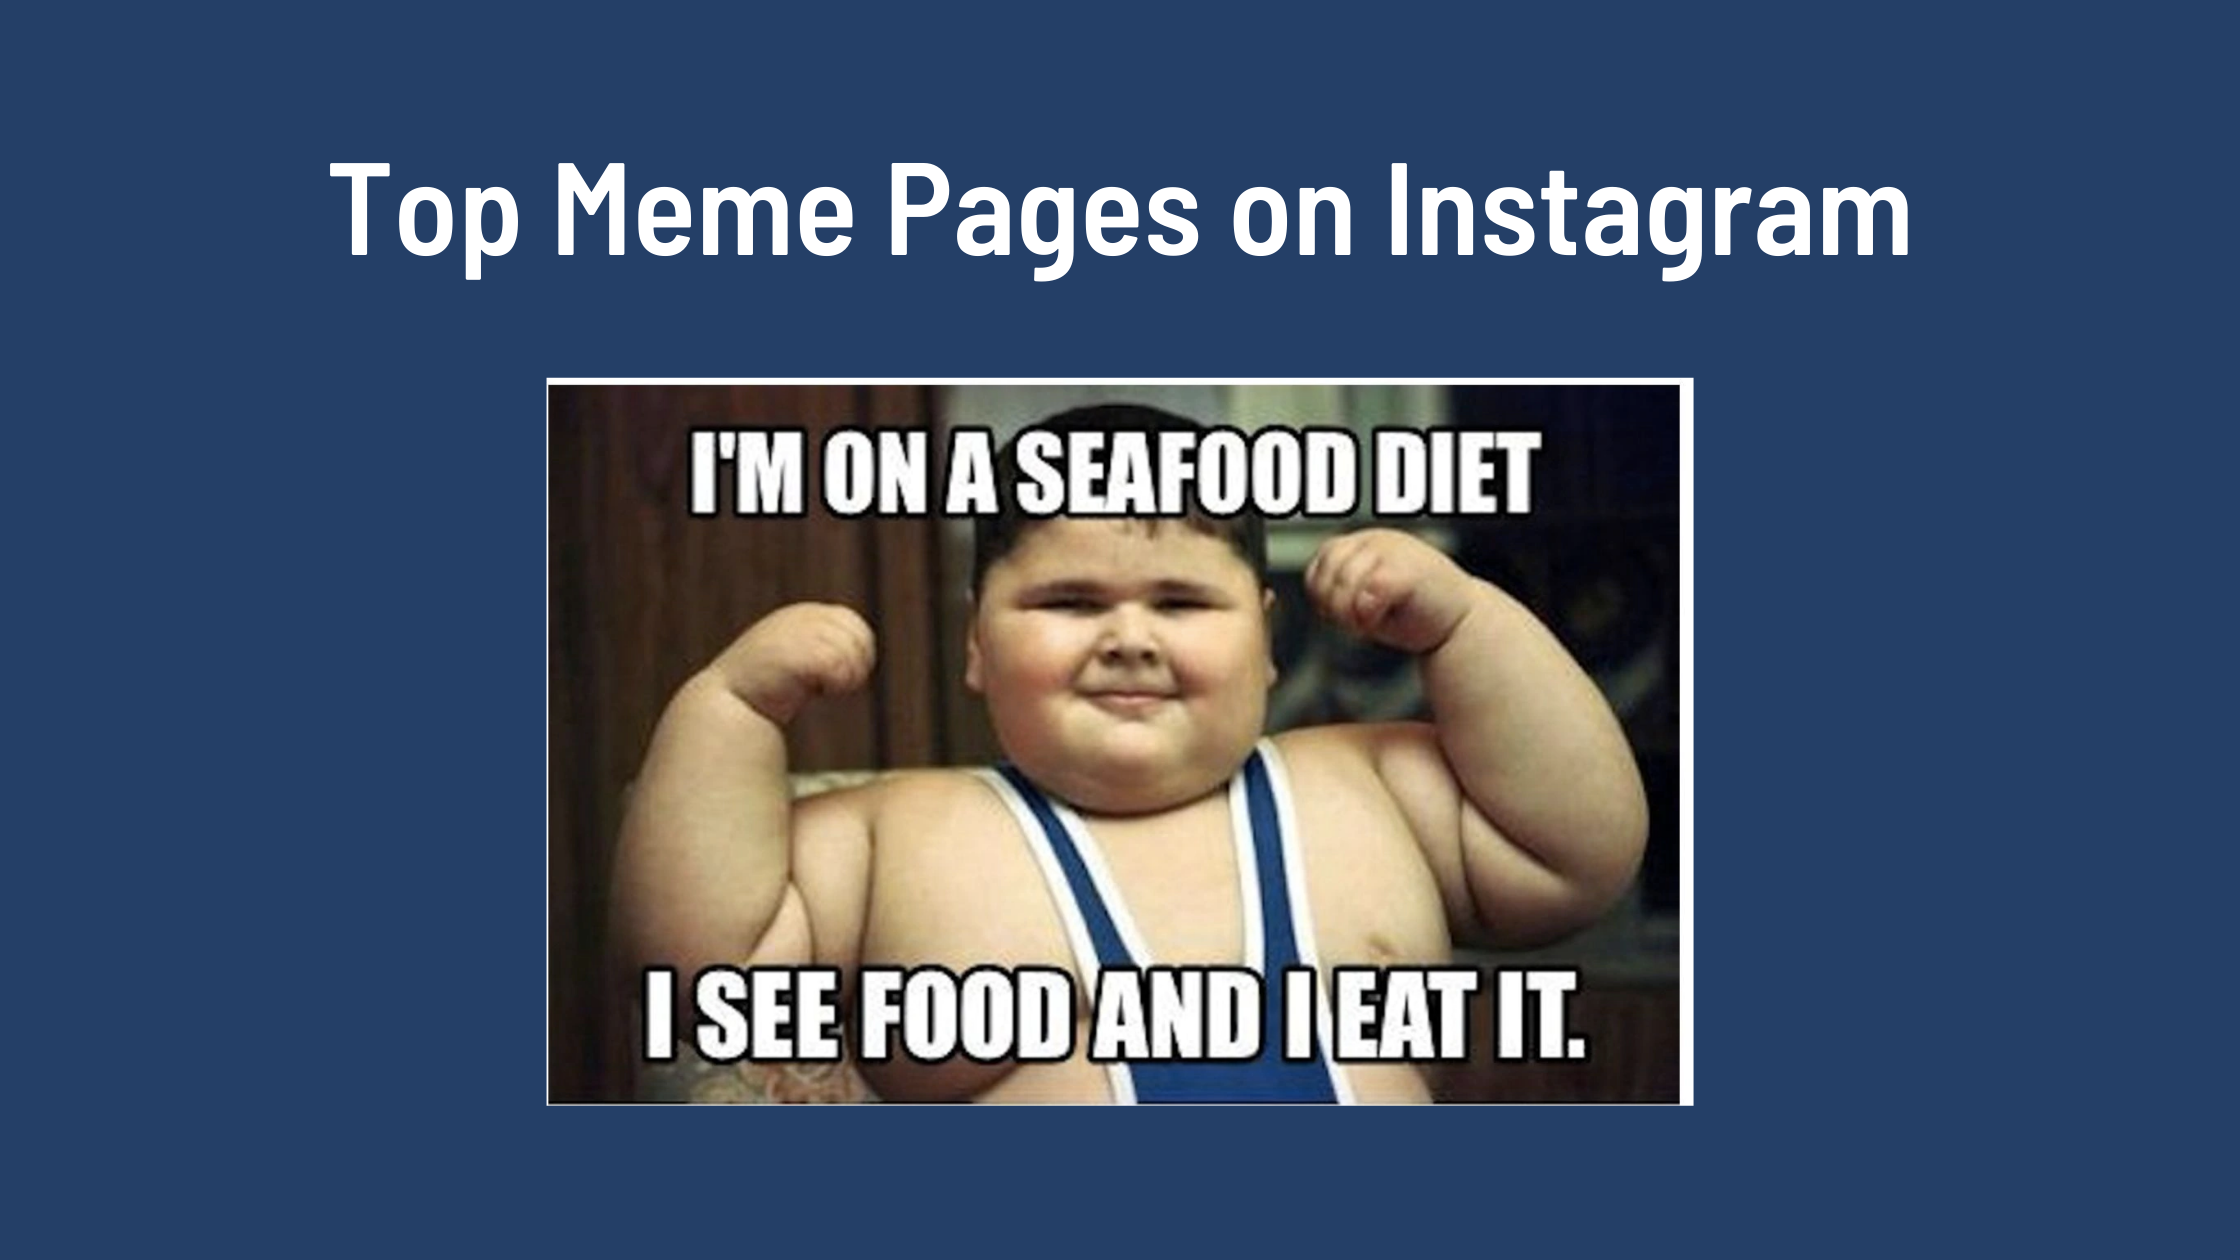 5 Best Meme Pages on Instagram That You Should Follow